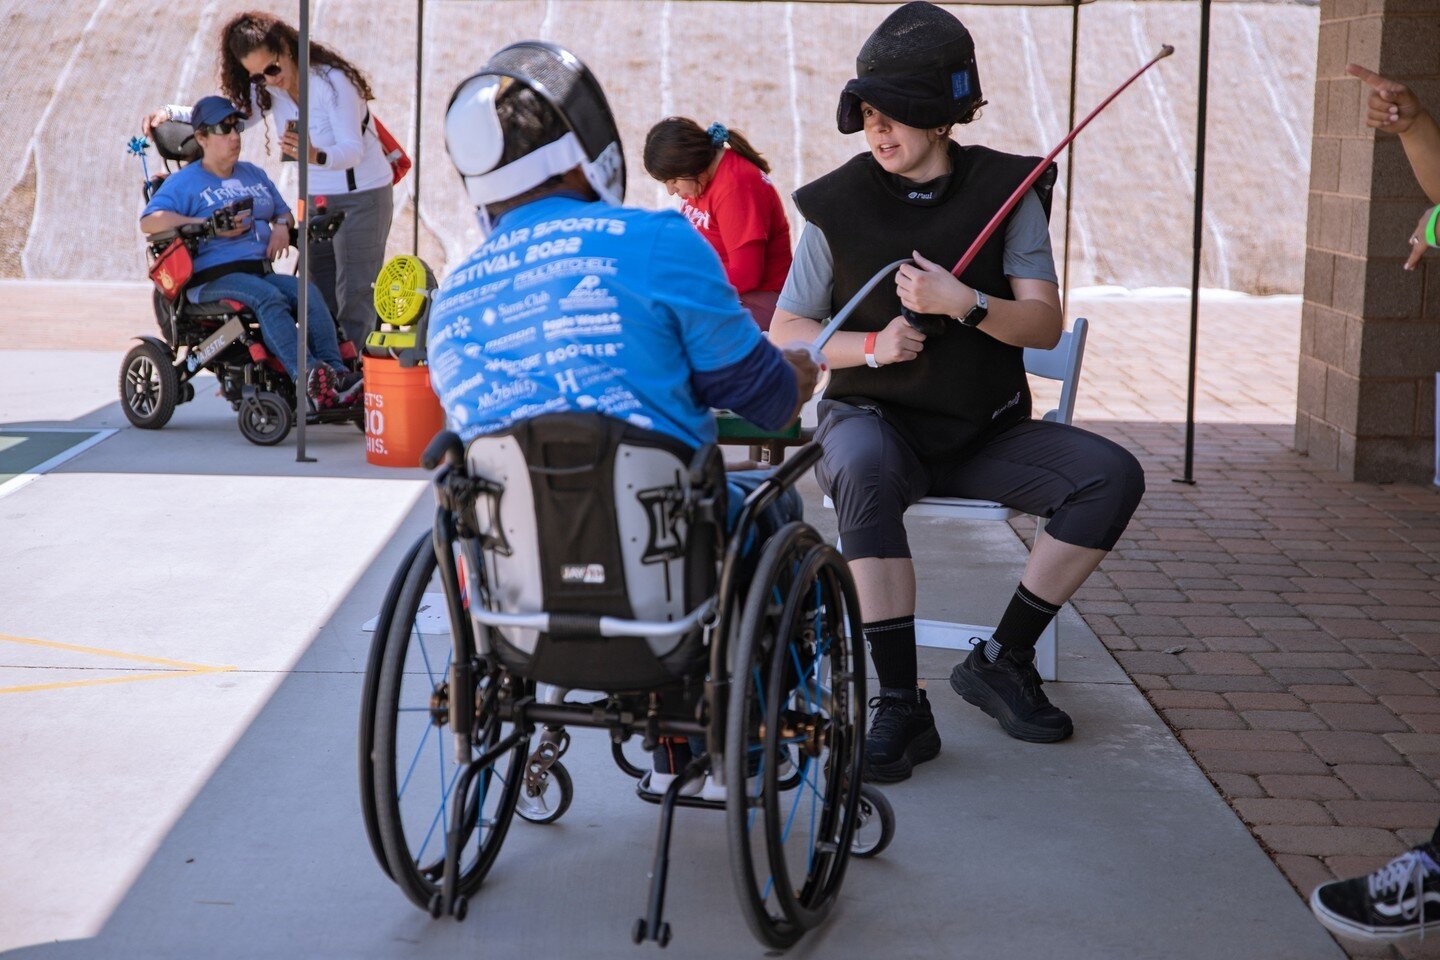 Continuing the spirit of inclusivity and empowerment at the Wheelchair Sports Festival! We're thrilled to share the impact our cross-collaboration made. ⁠
⁠
#wheelchairsportsfestival #inclusivitymatters #empowermentthroughsport #fencingforall #united